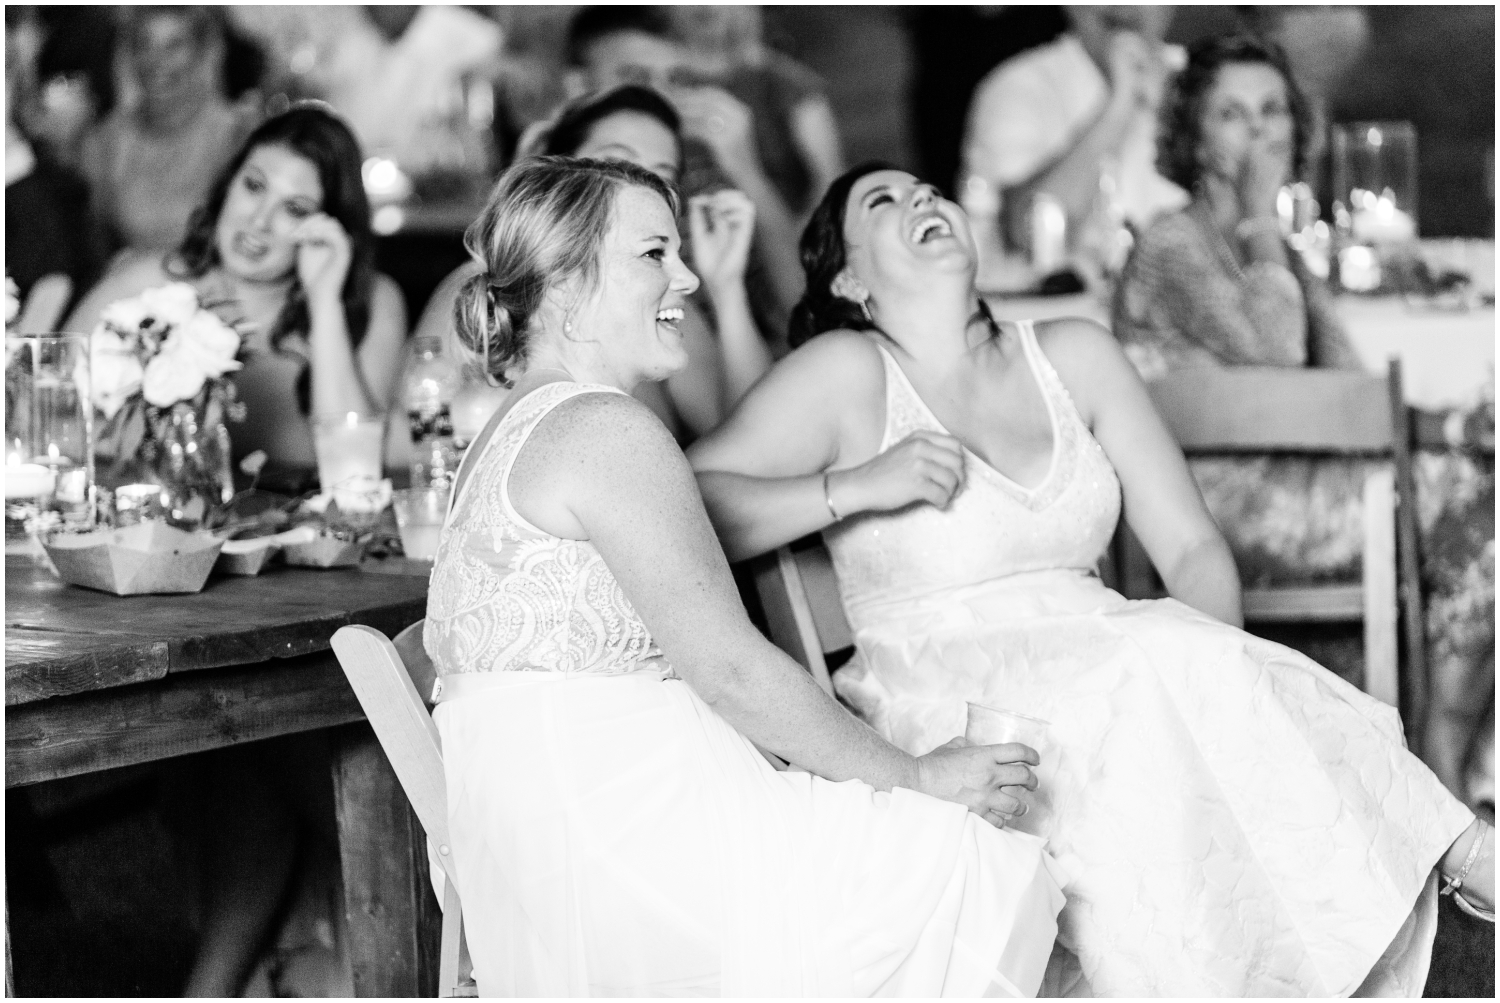  the Brides laughing at their wedding in MN 